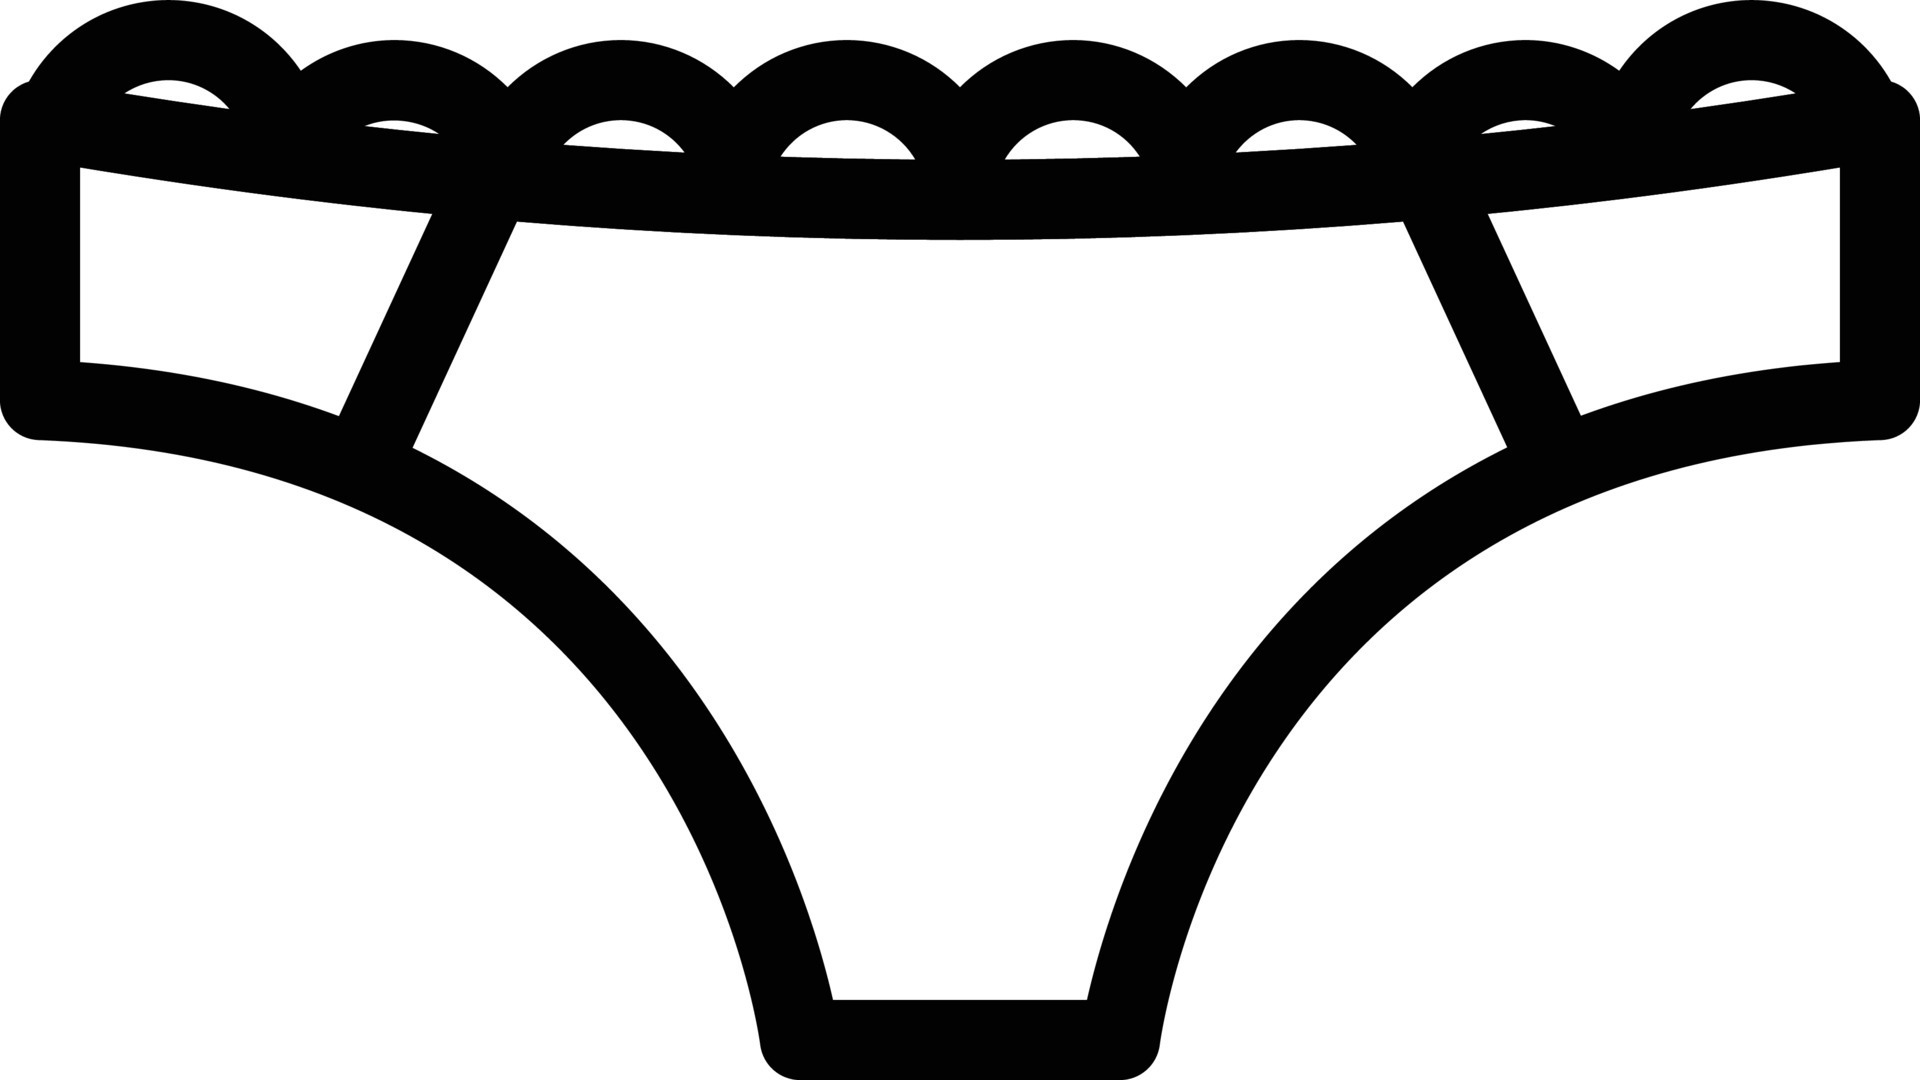 https://static.vecteezy.com/system/resources/previews/012/782/373/original/underwear-illustration-on-a-background-premium-quality-symbols-icons-for-concept-and-graphic-design-vector.jpg